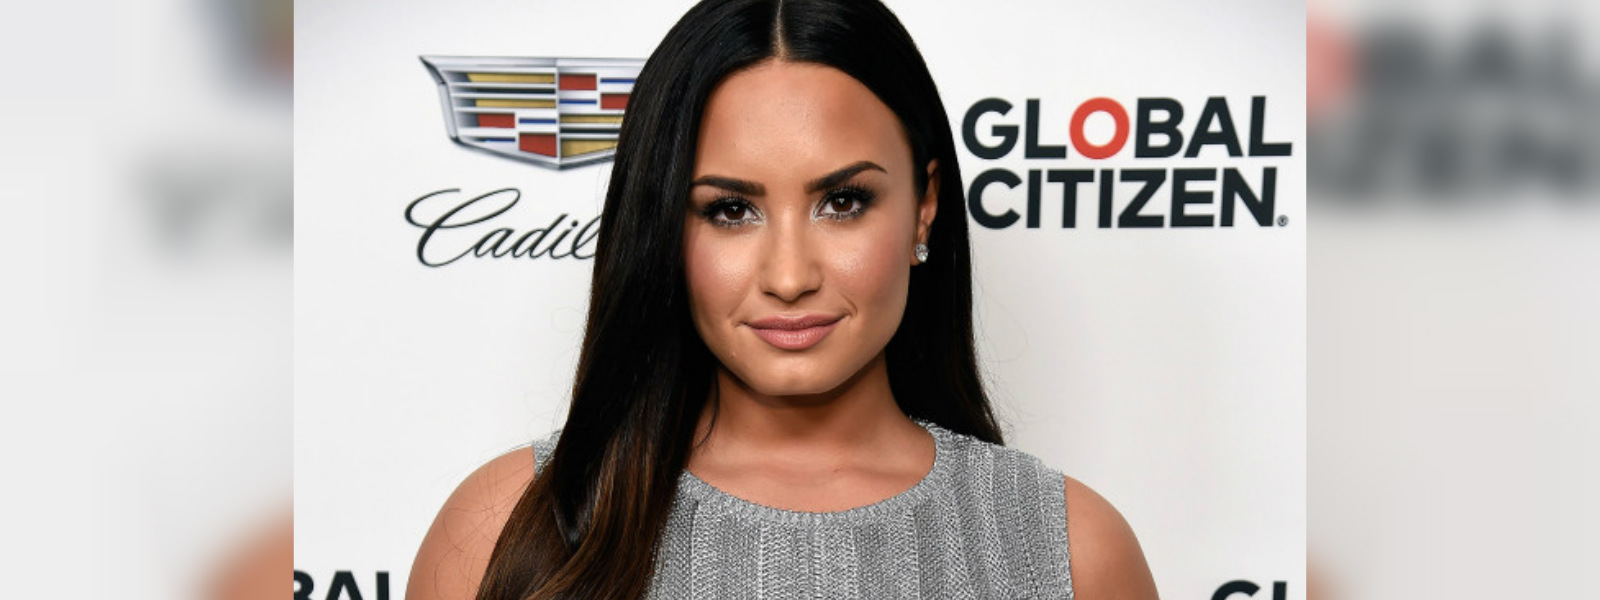 Demi Lovato: "I am sober and grateful to be alive